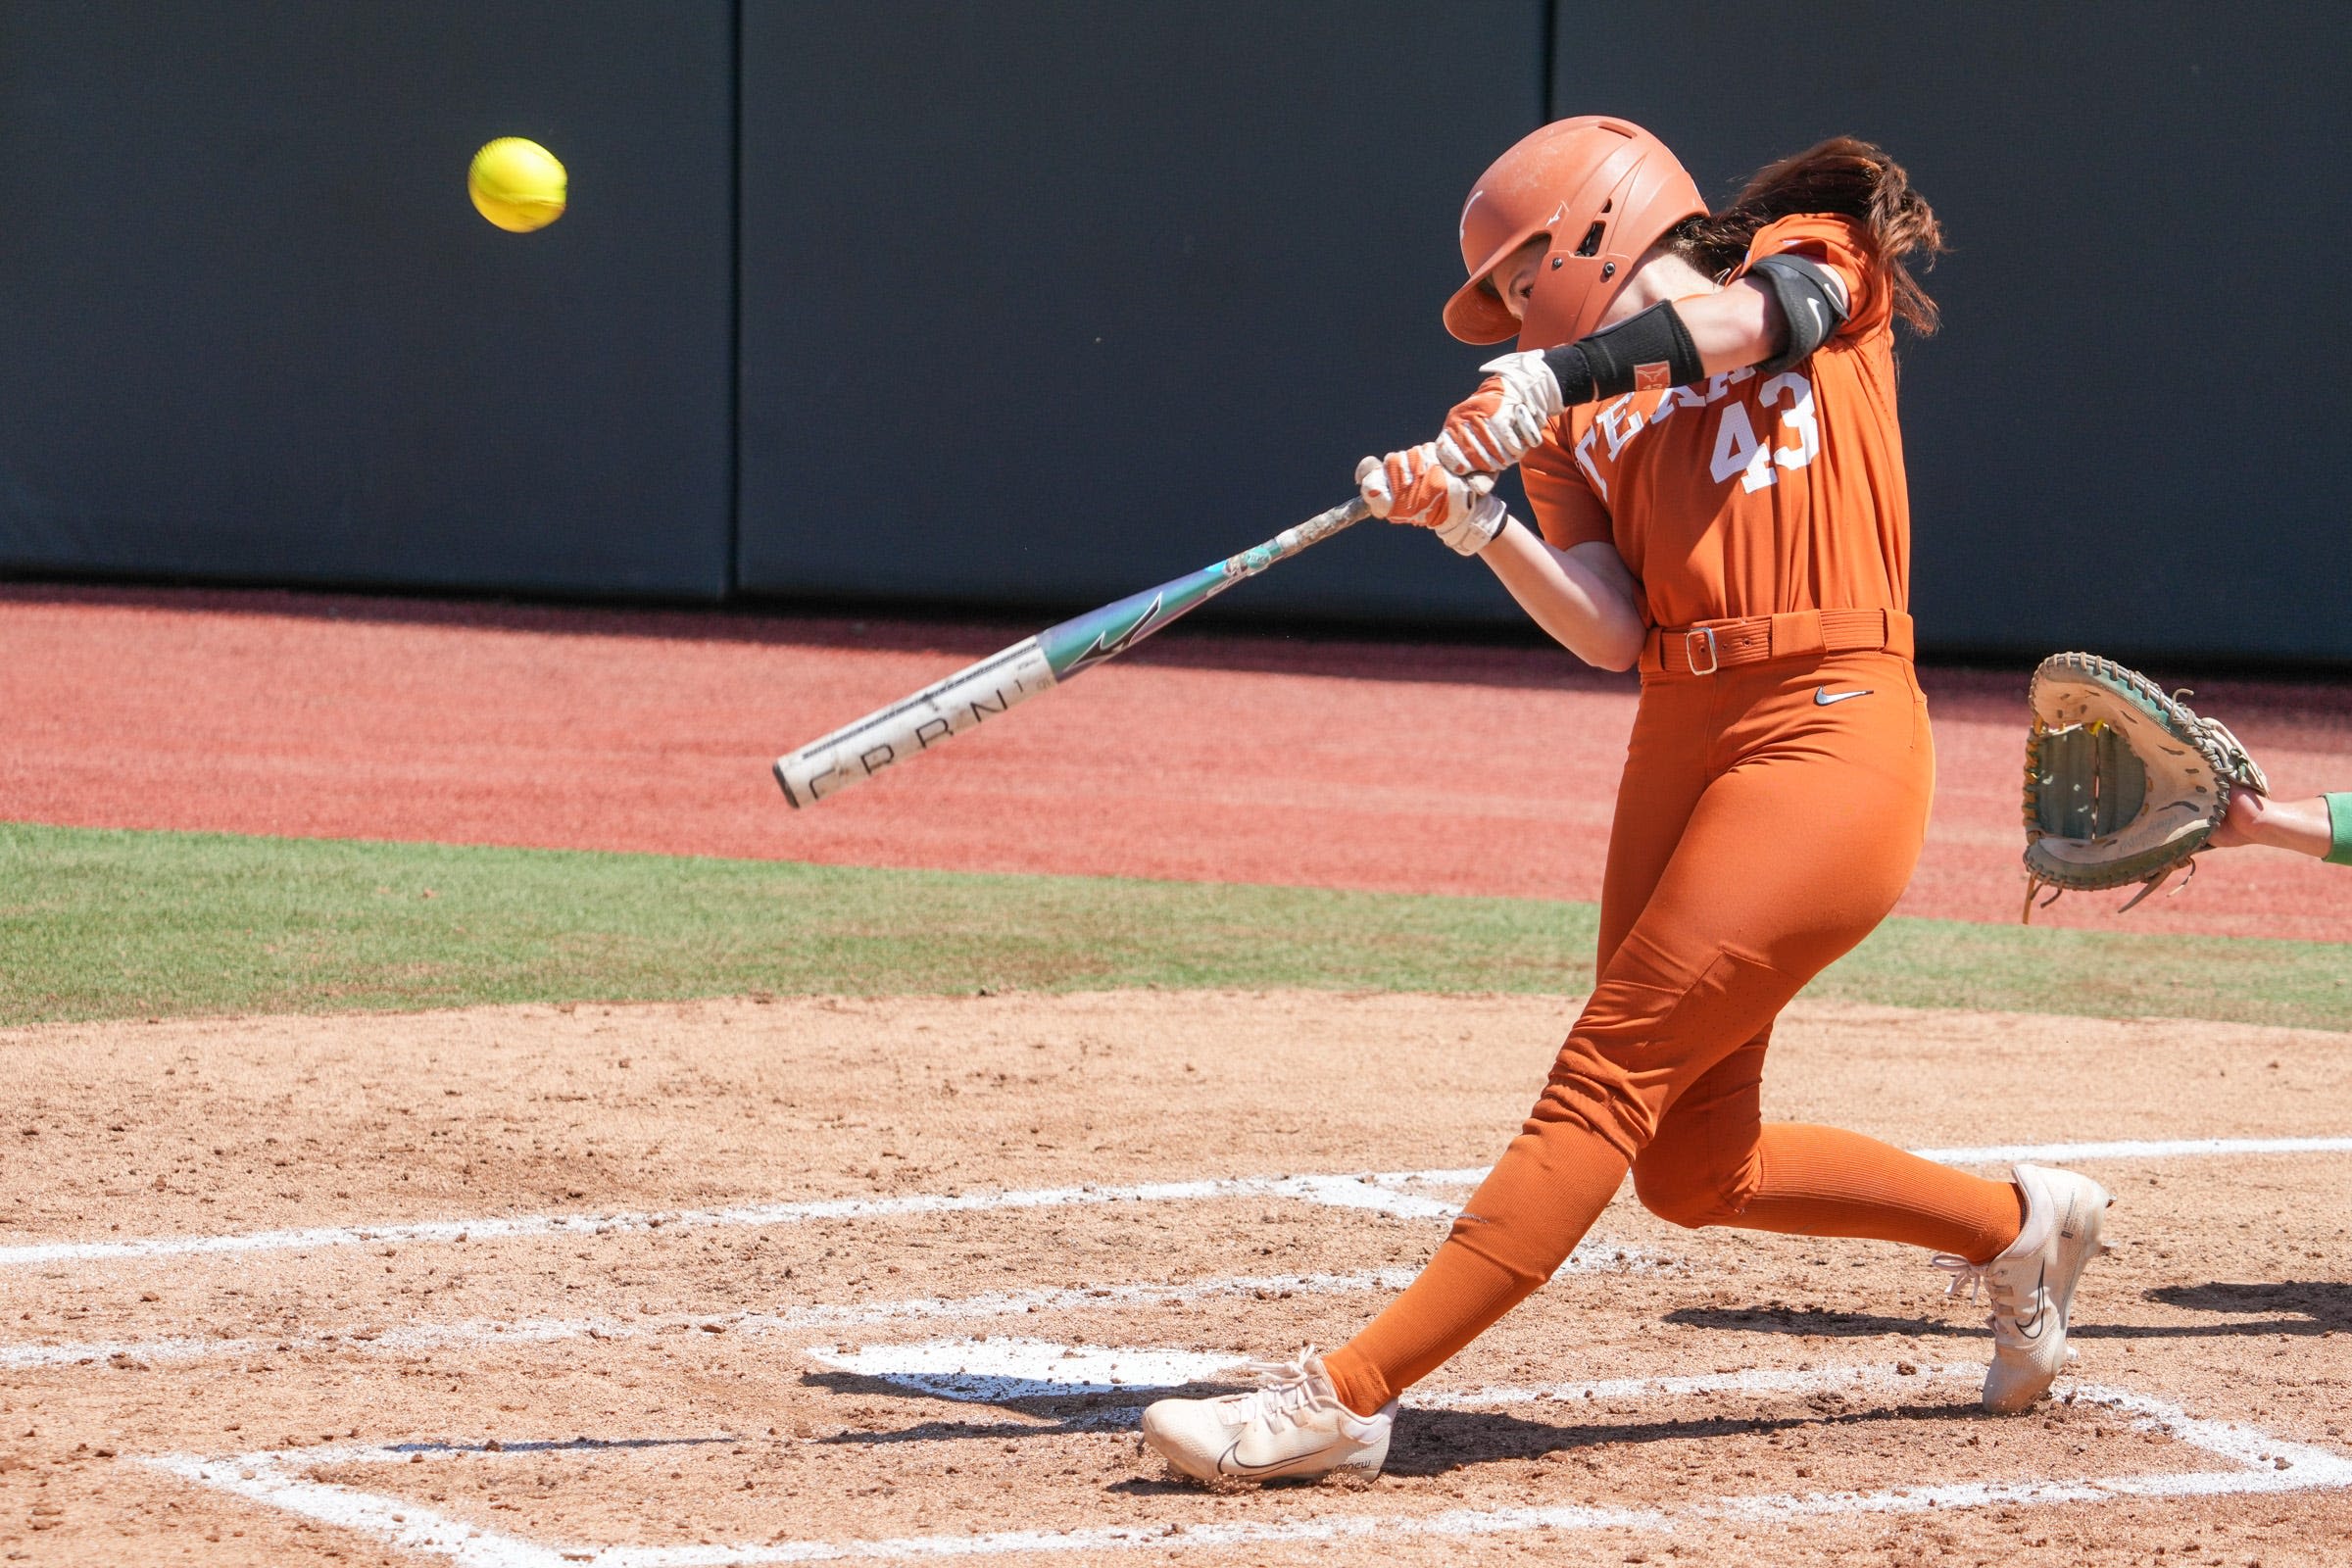 Texas softball vs. Texas A&M is sold out, but tickets can be found for right price